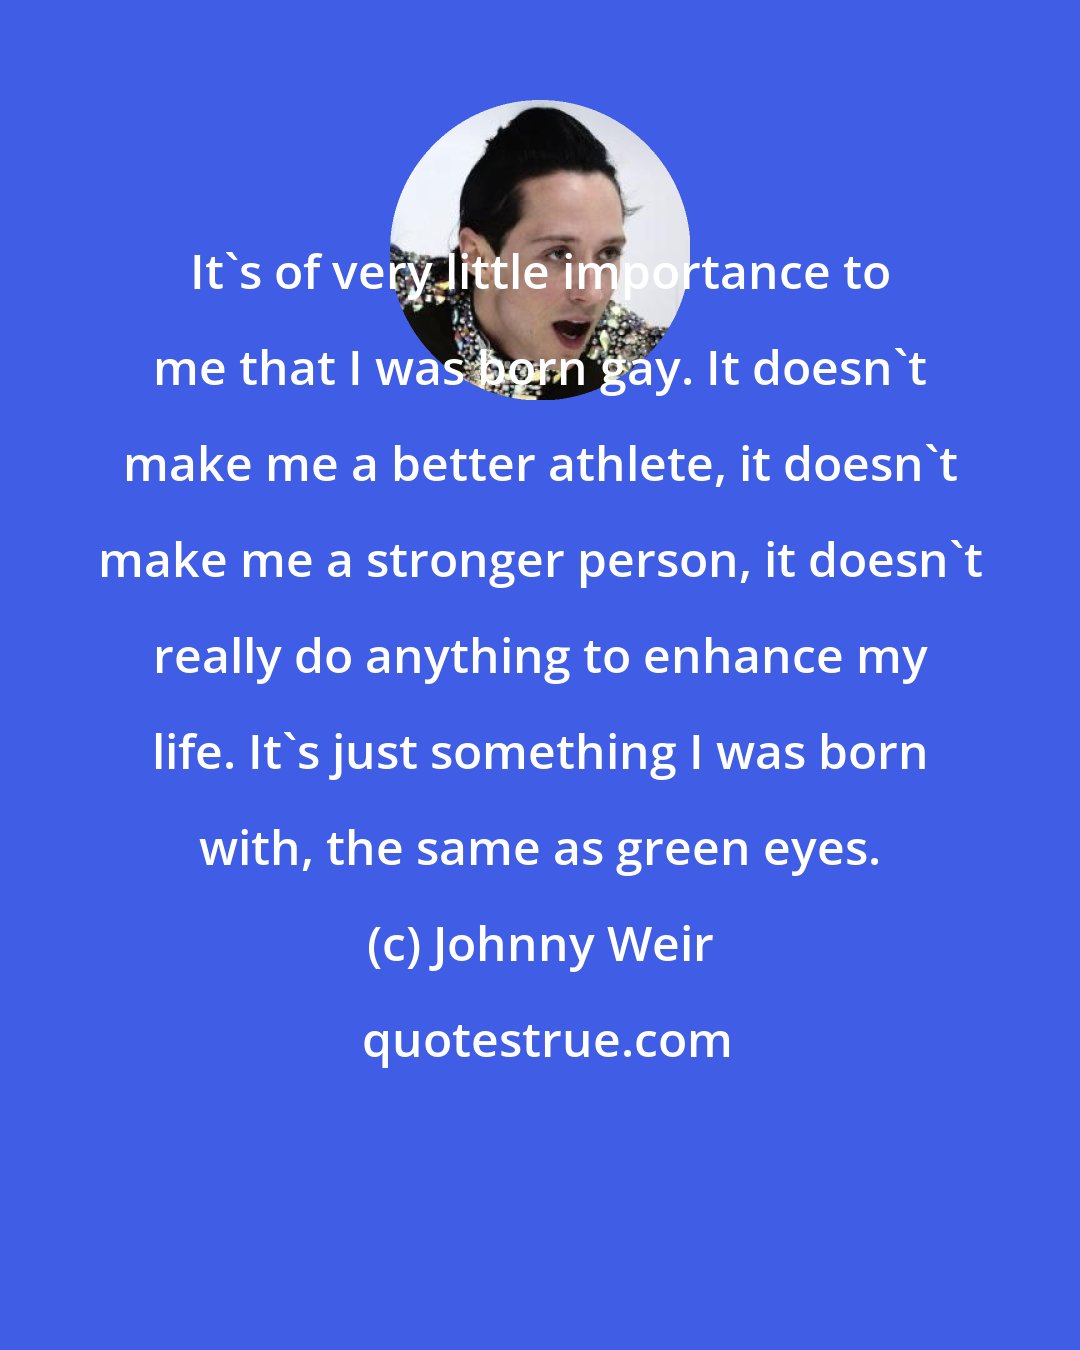 Johnny Weir: It's of very little importance to me that I was born gay. It doesn't make me a better athlete, it doesn't make me a stronger person, it doesn't really do anything to enhance my life. It's just something I was born with, the same as green eyes.